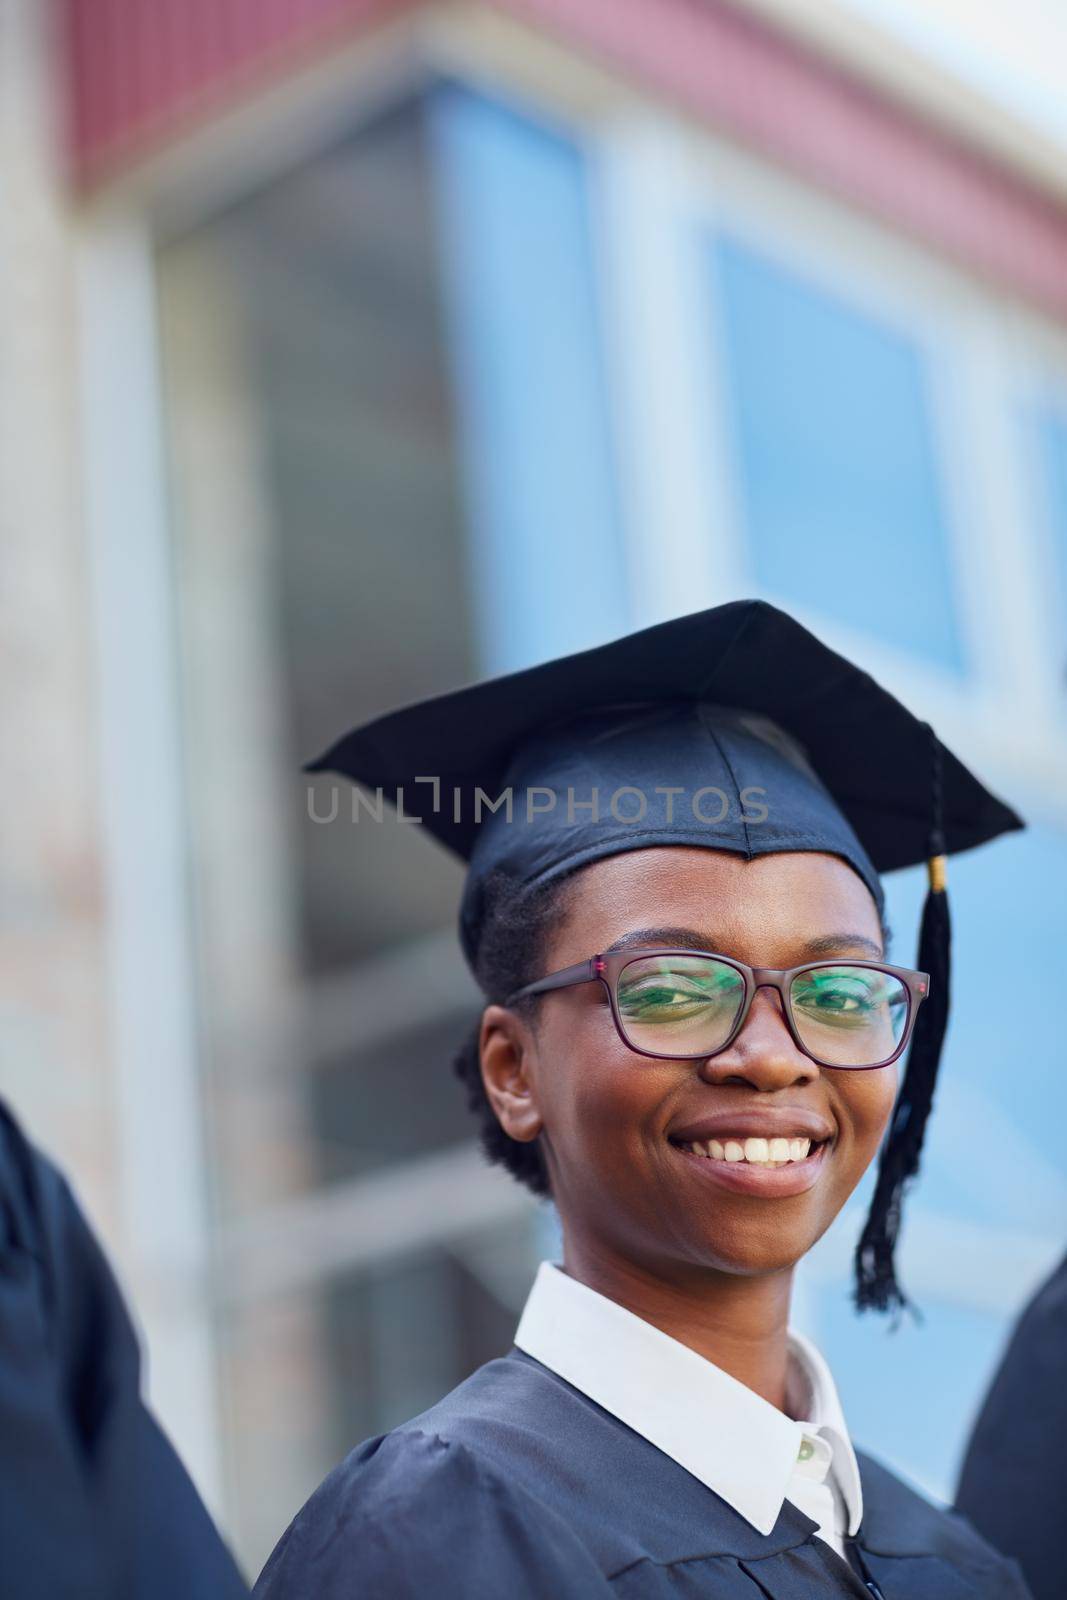 Making my family proud. Portrait of a happy female student standing outside on her graduation day